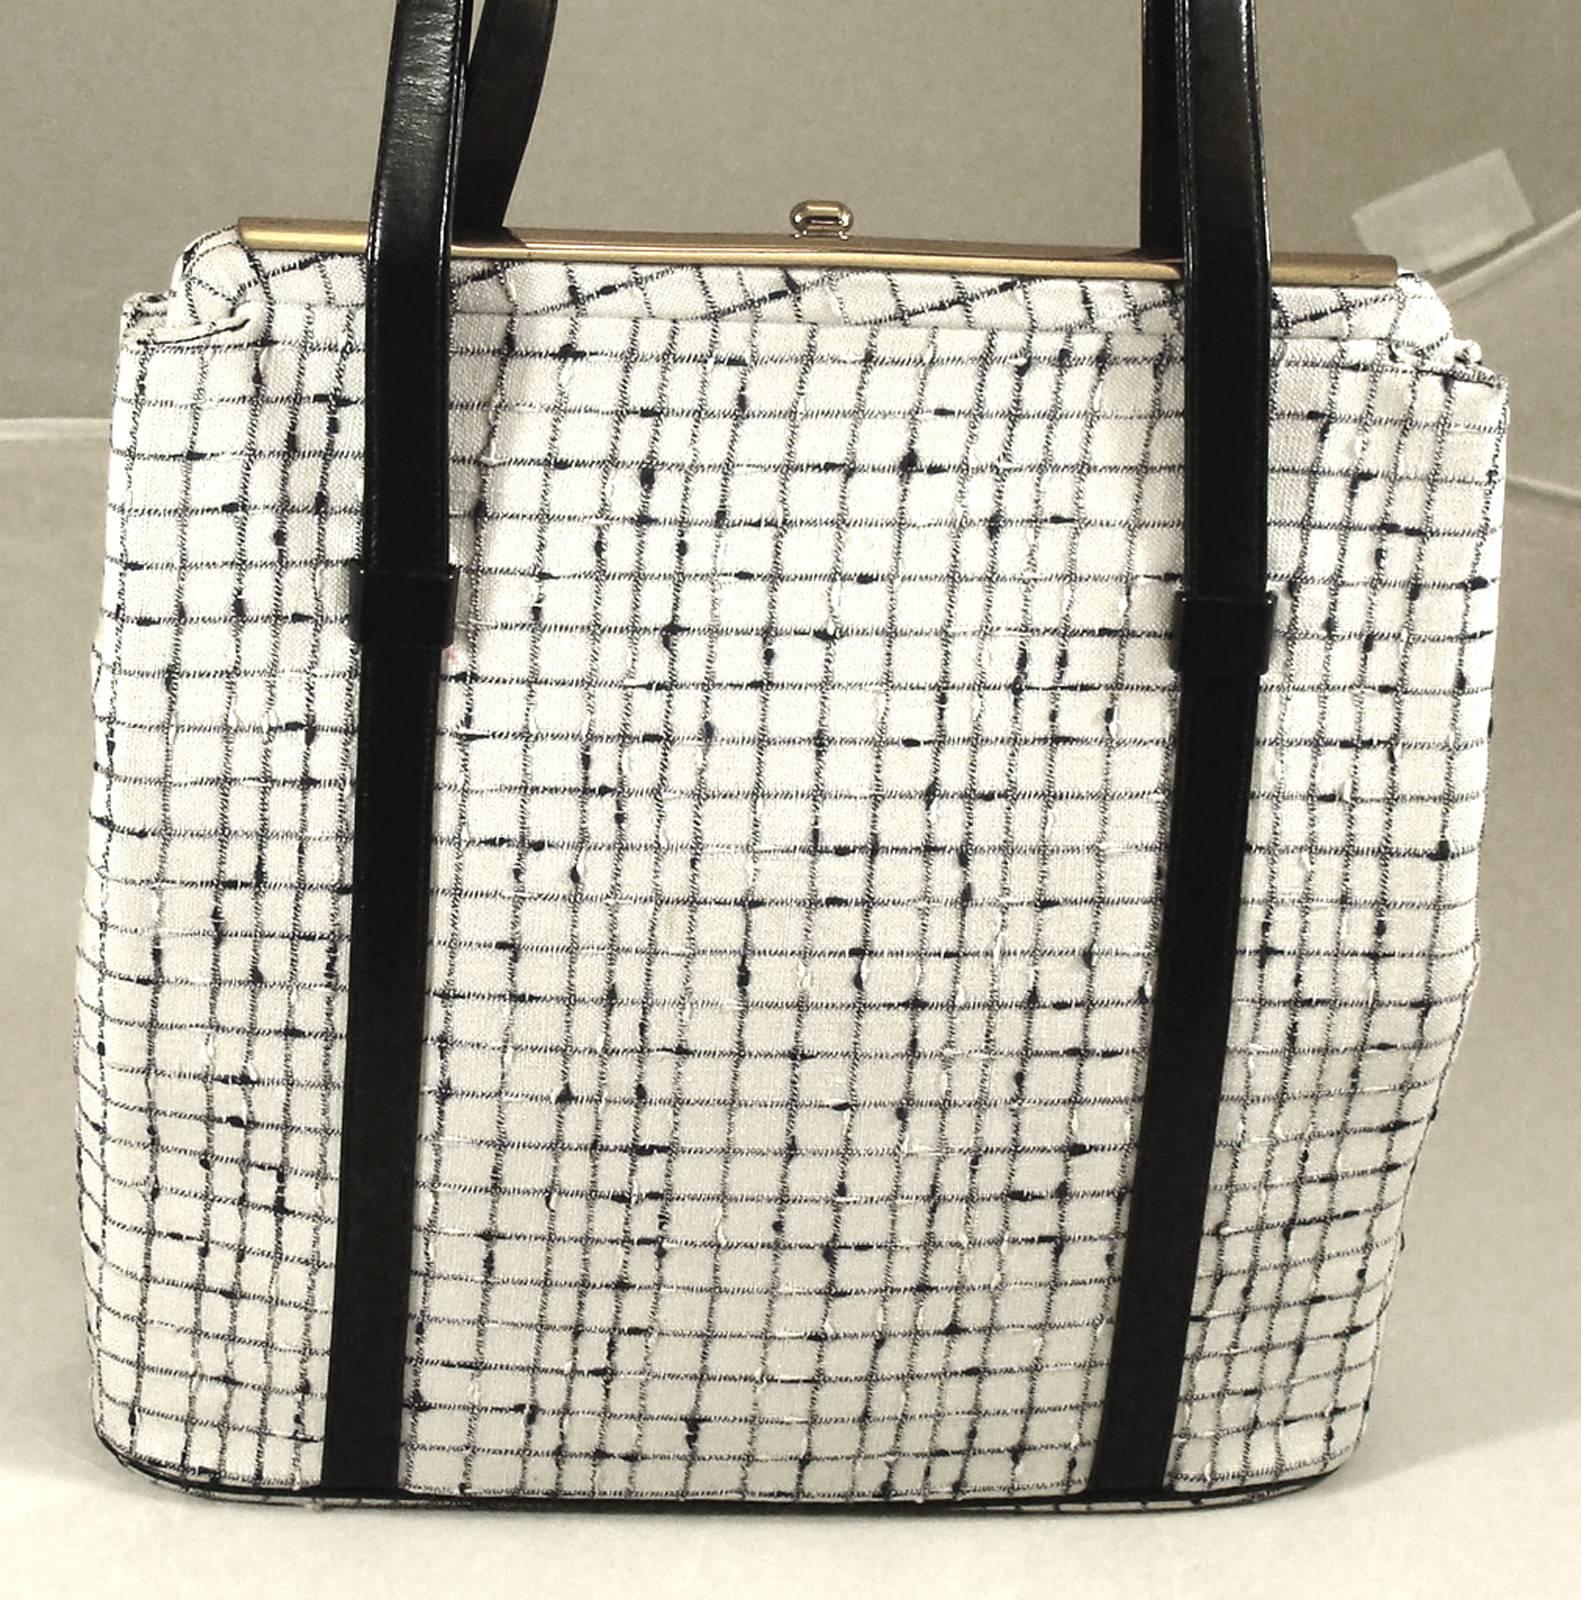 This charming bag double handle bag is a welcome consignment from one of our long-time collectors.  She has a great eye and we appreciate being able to offer unusual pieces from her collection.  

This purse is made of a plaid fabric of creamy white